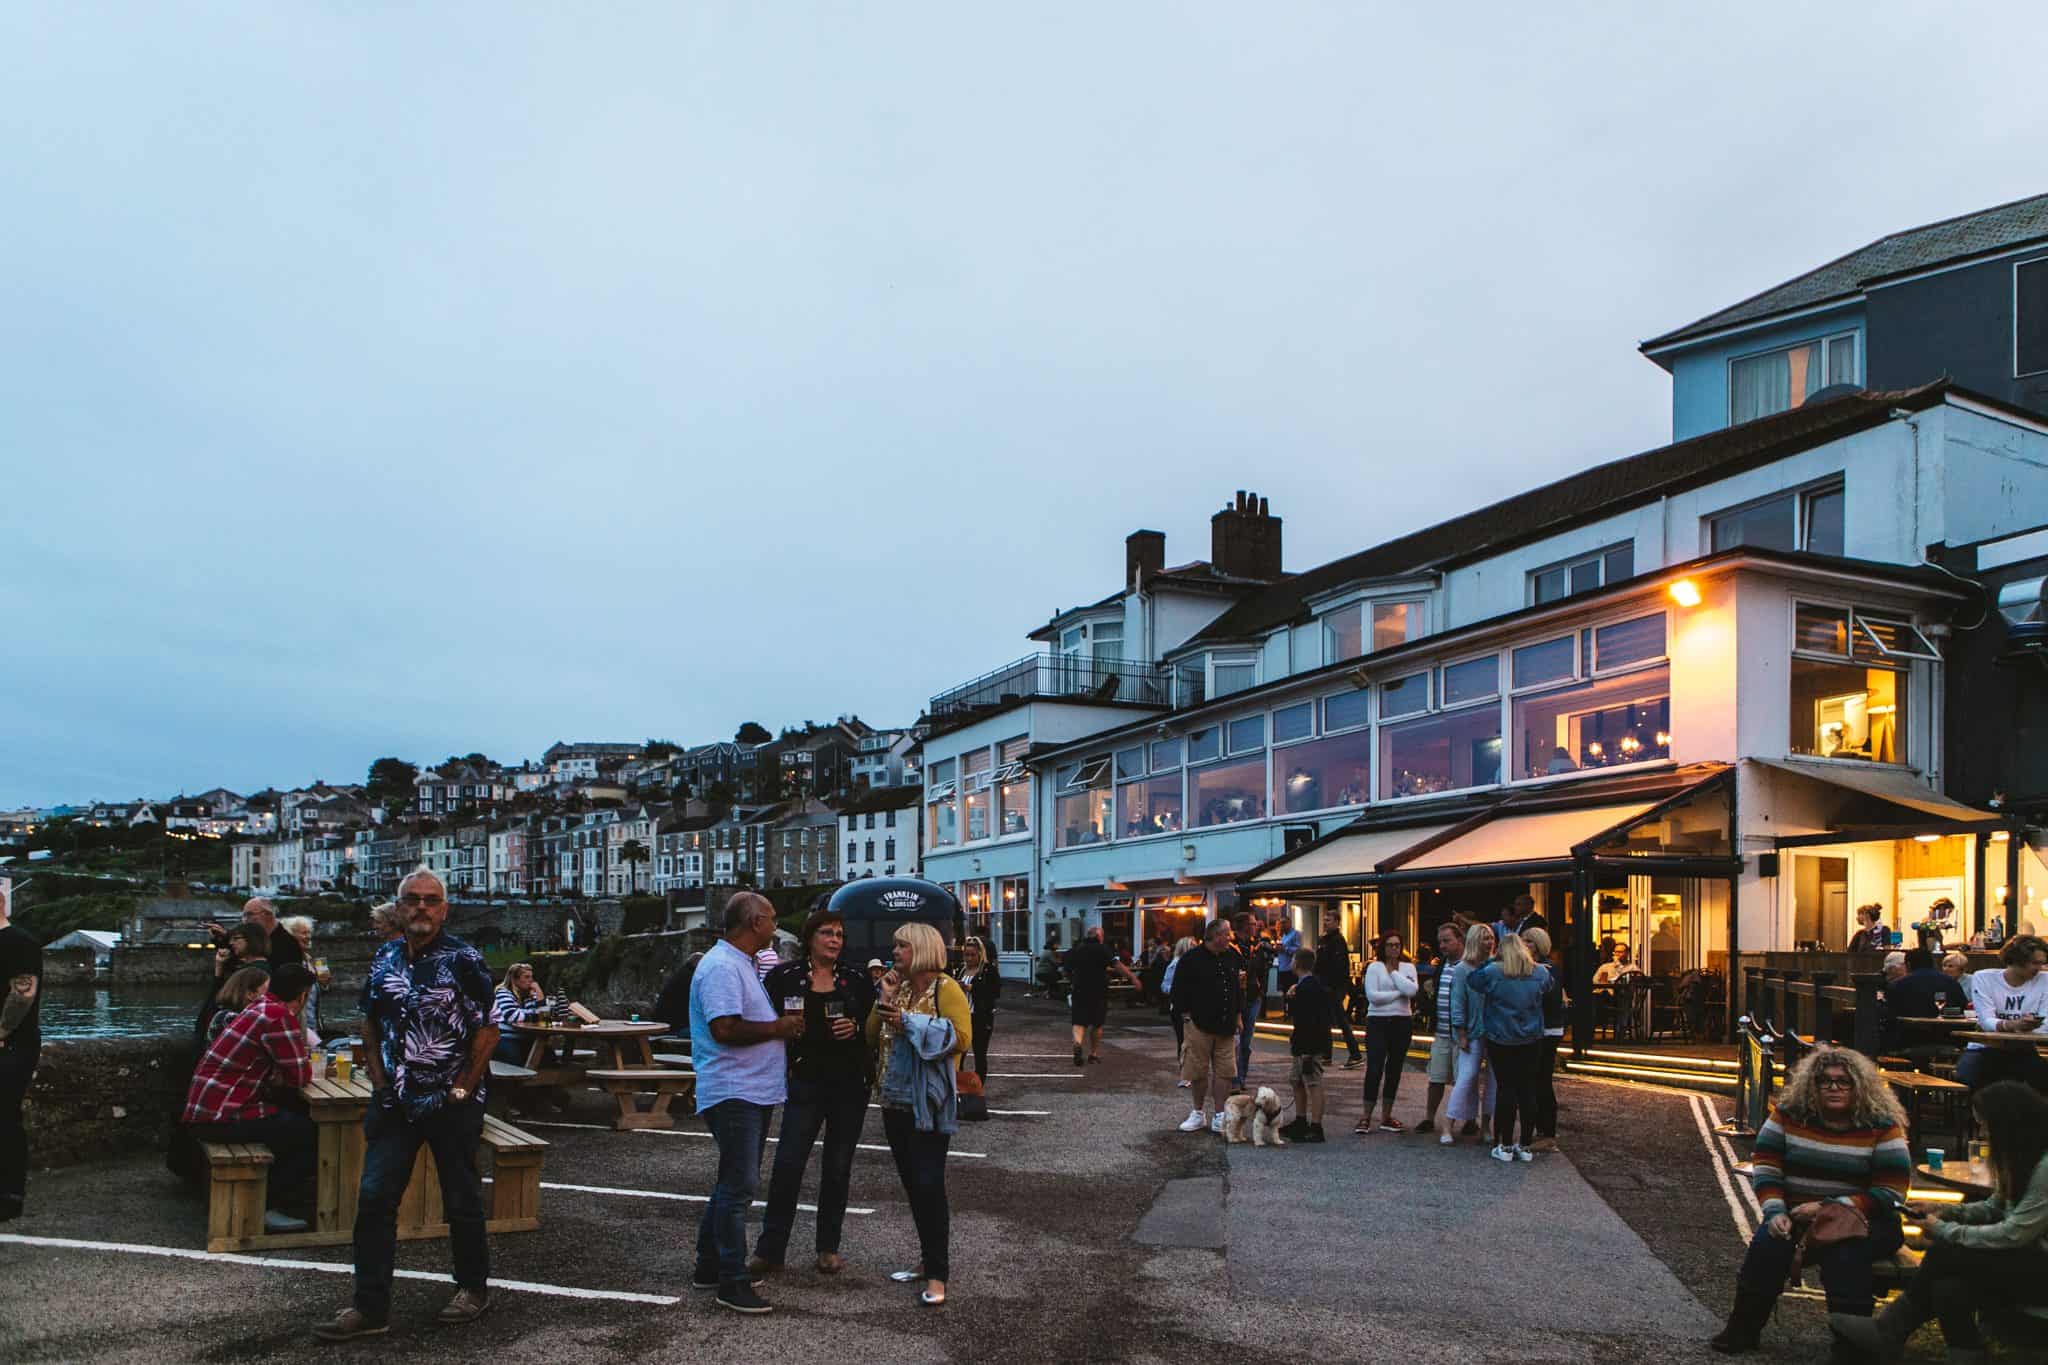 falmouth-week-at-the-working-boat-pub-live-music-events-falmouth-cornwall (46 of 114)